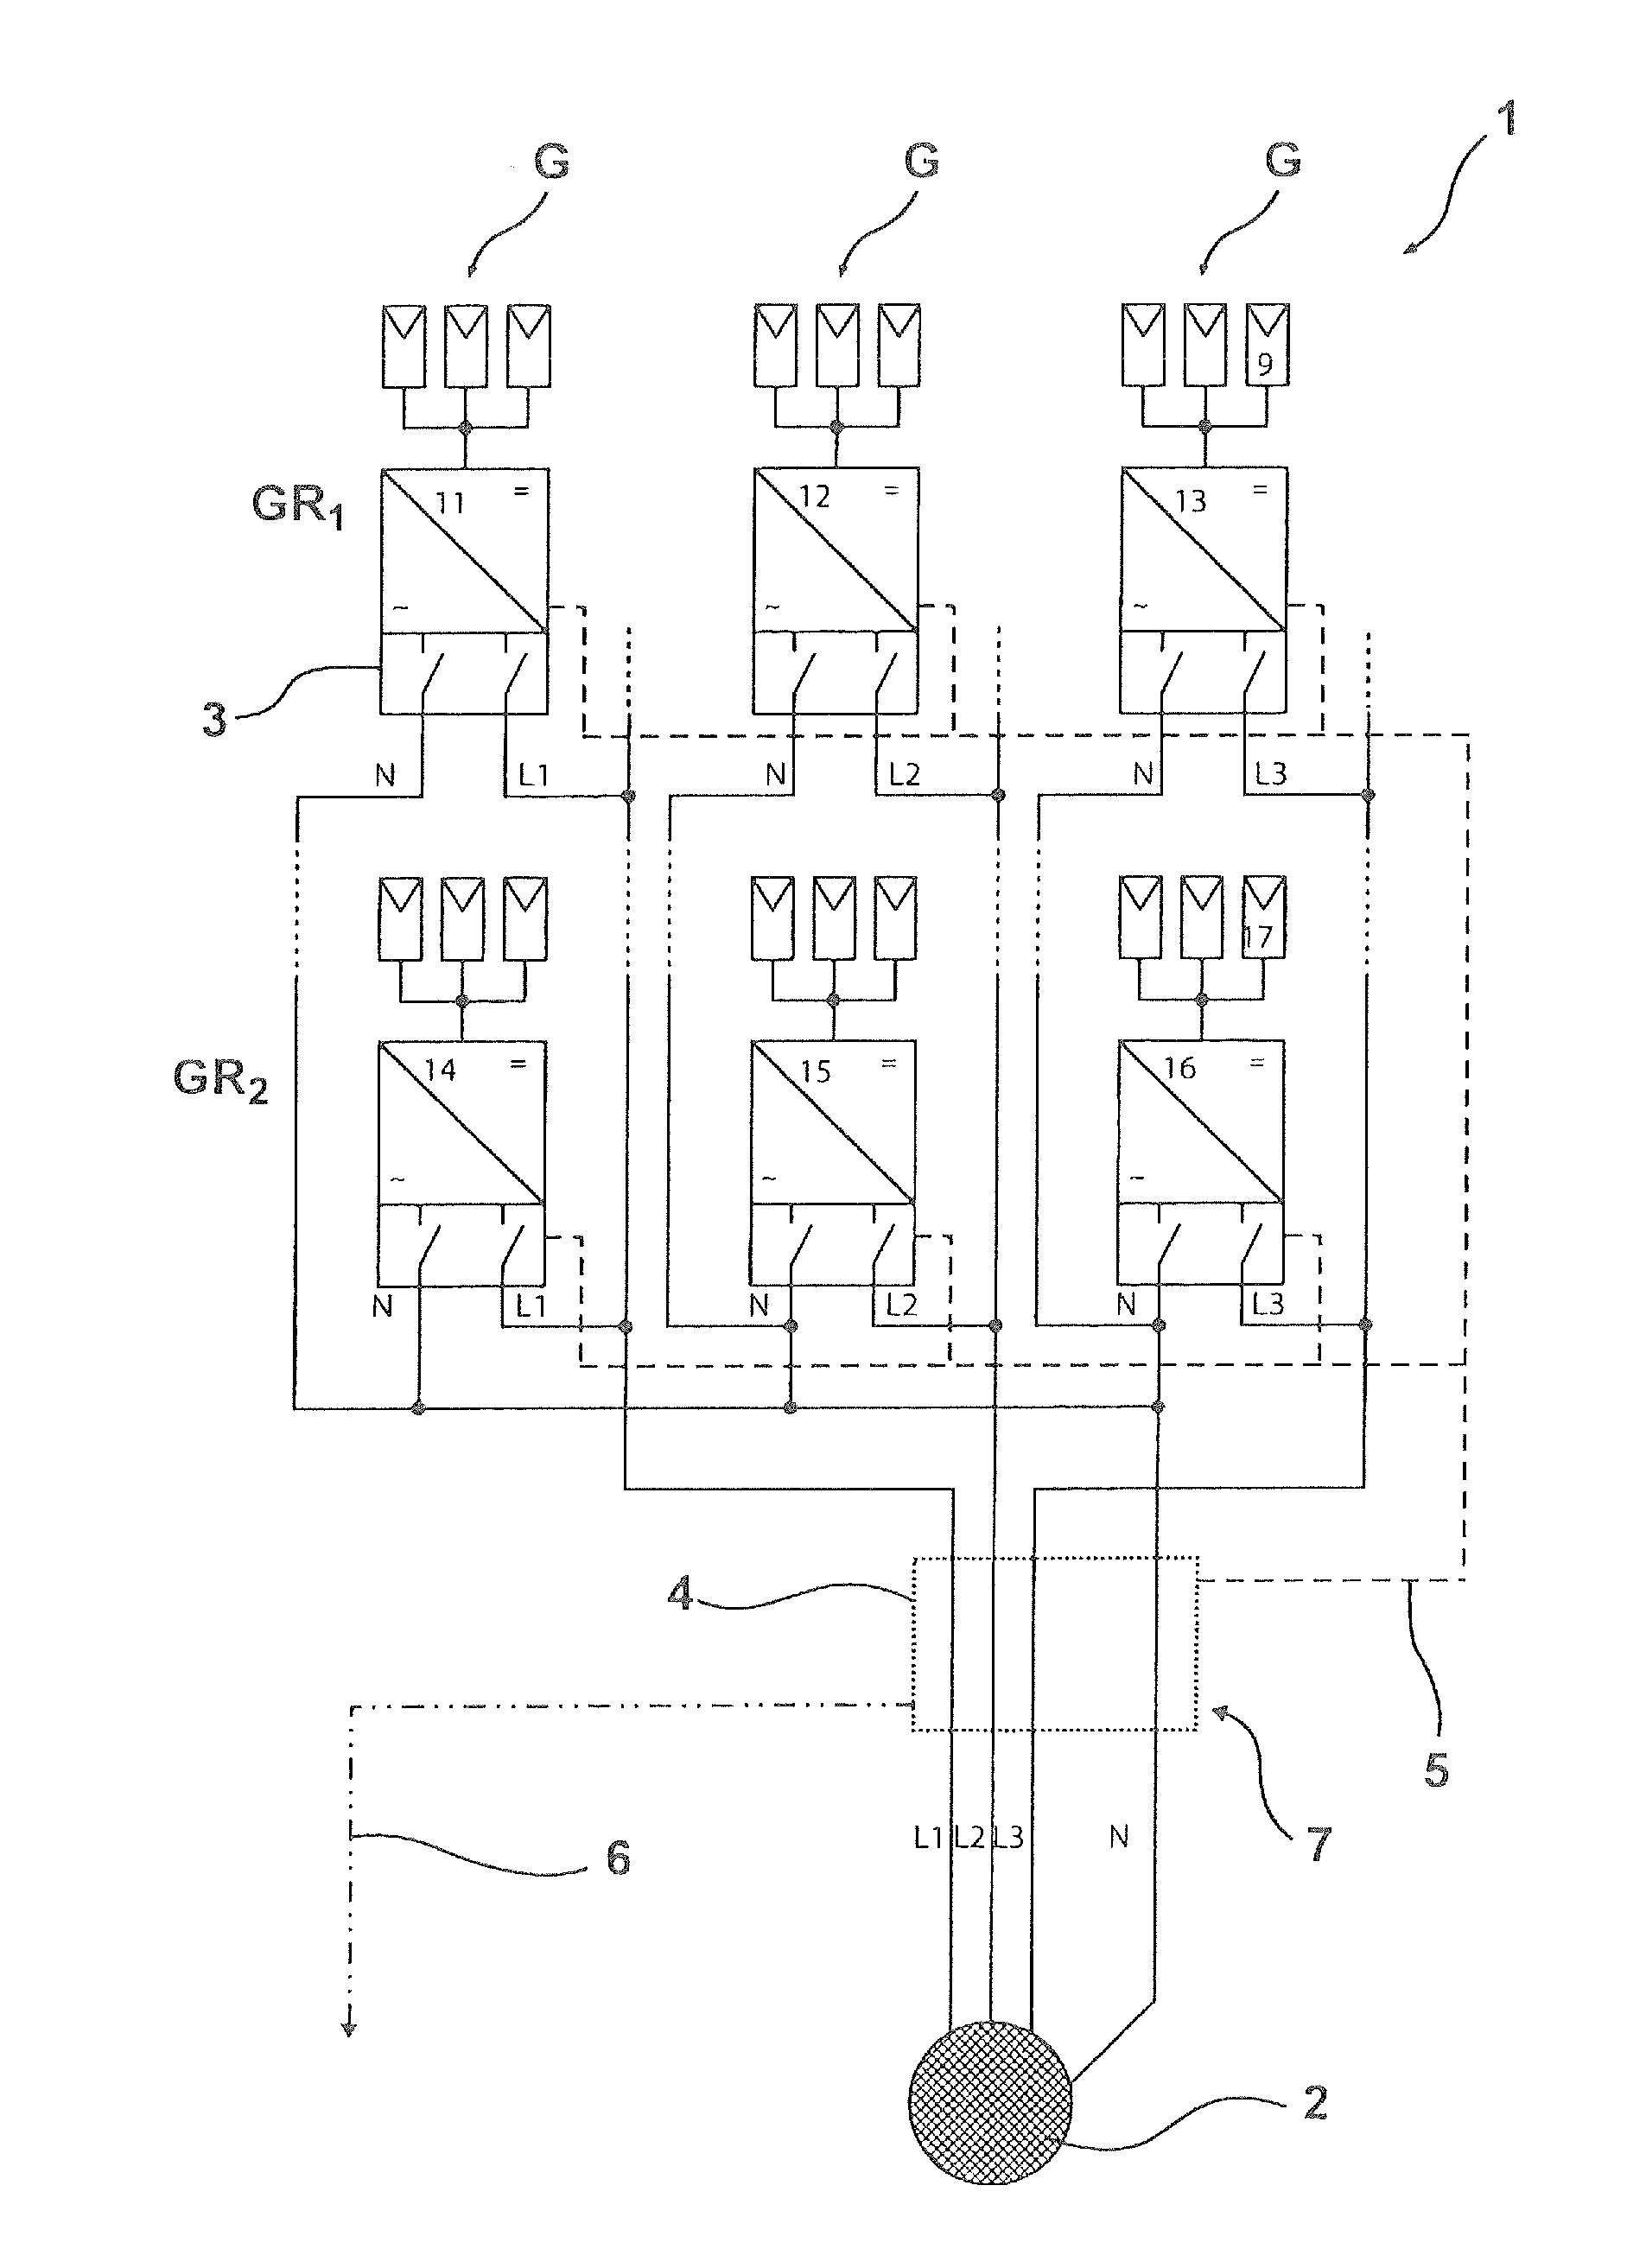 Photovoltaic system for feeding three-phase current into a power grid